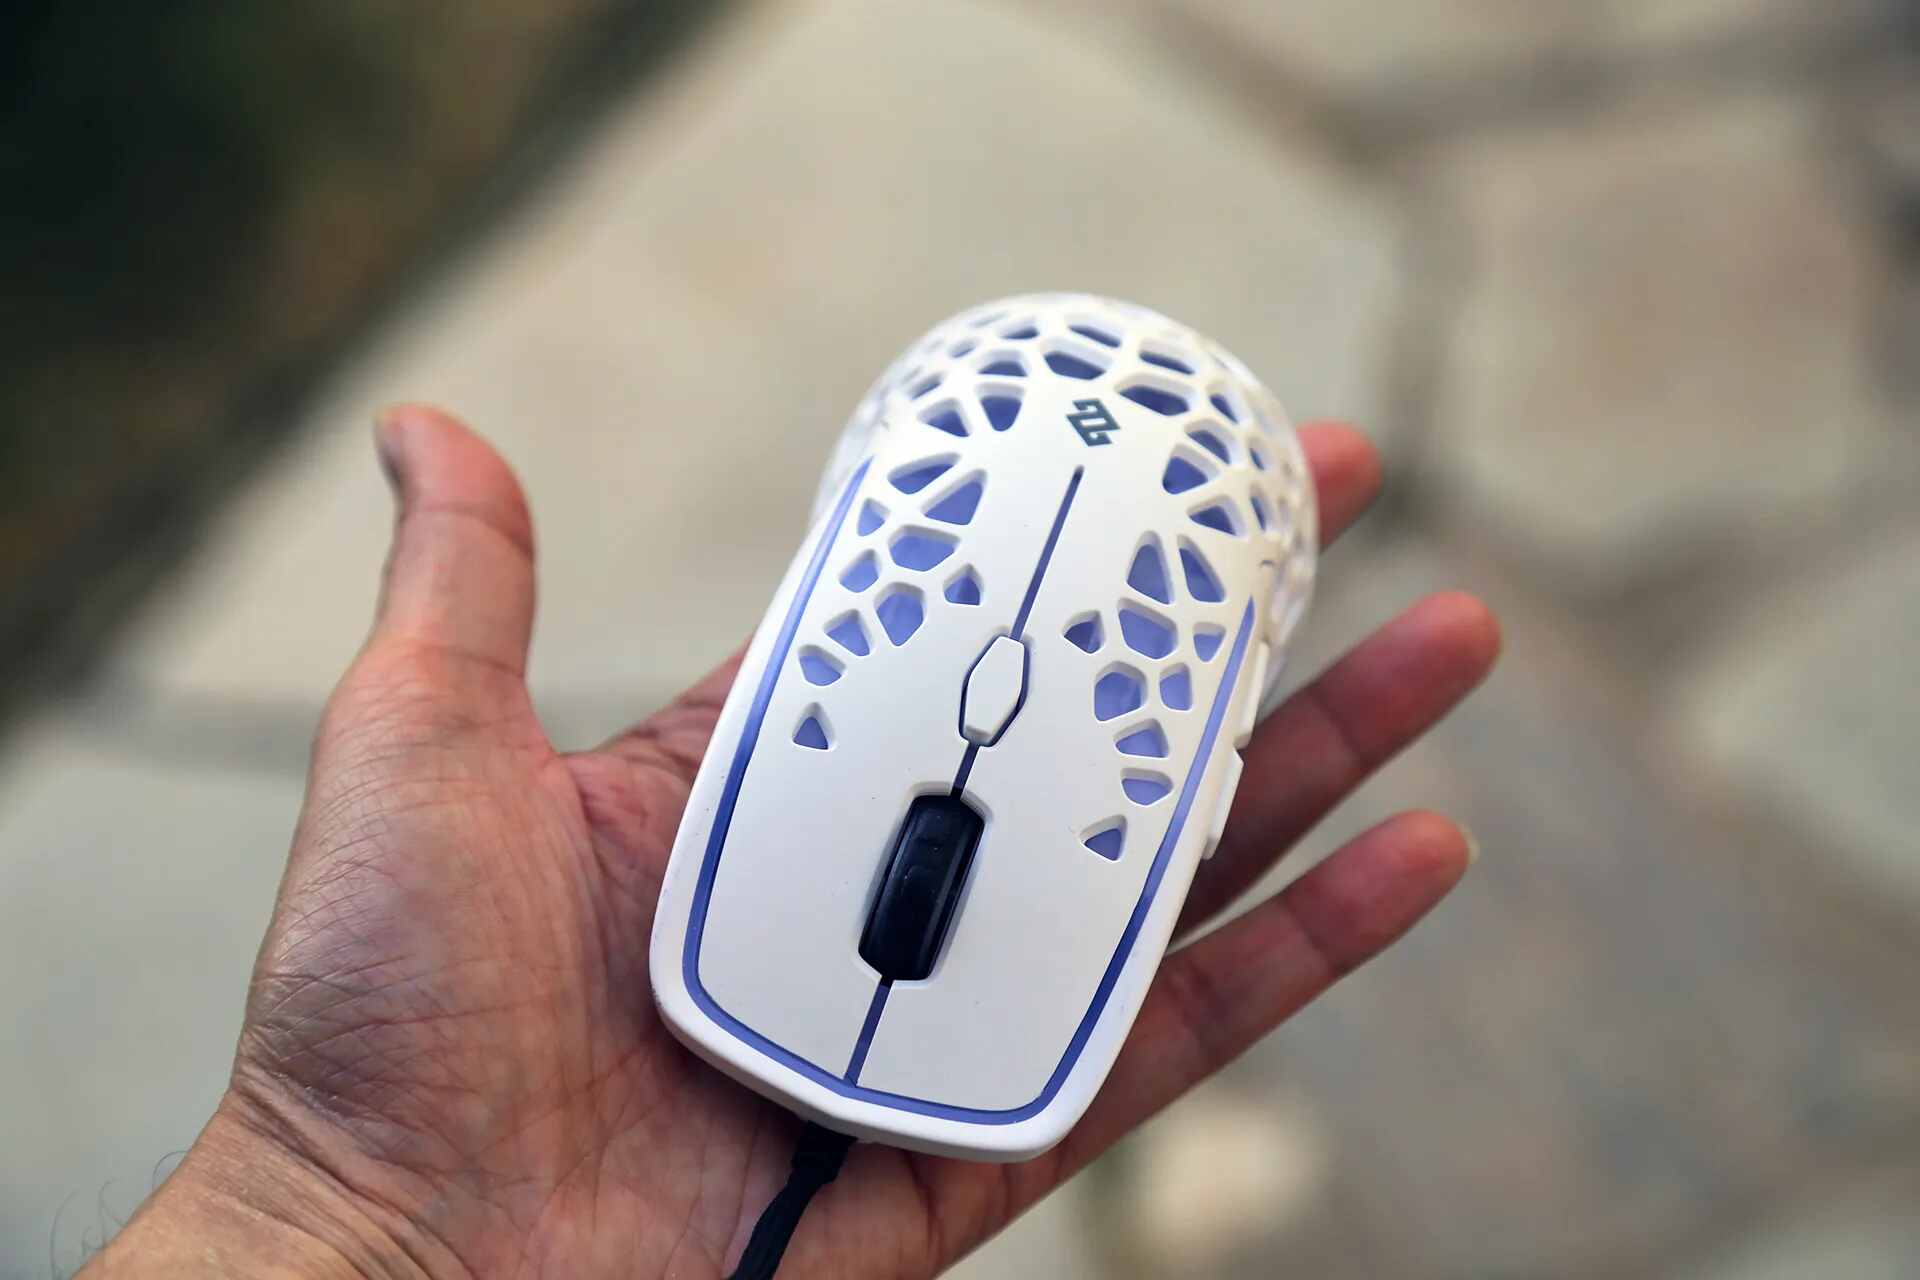 How To Make Gaming Mouse More Slippery